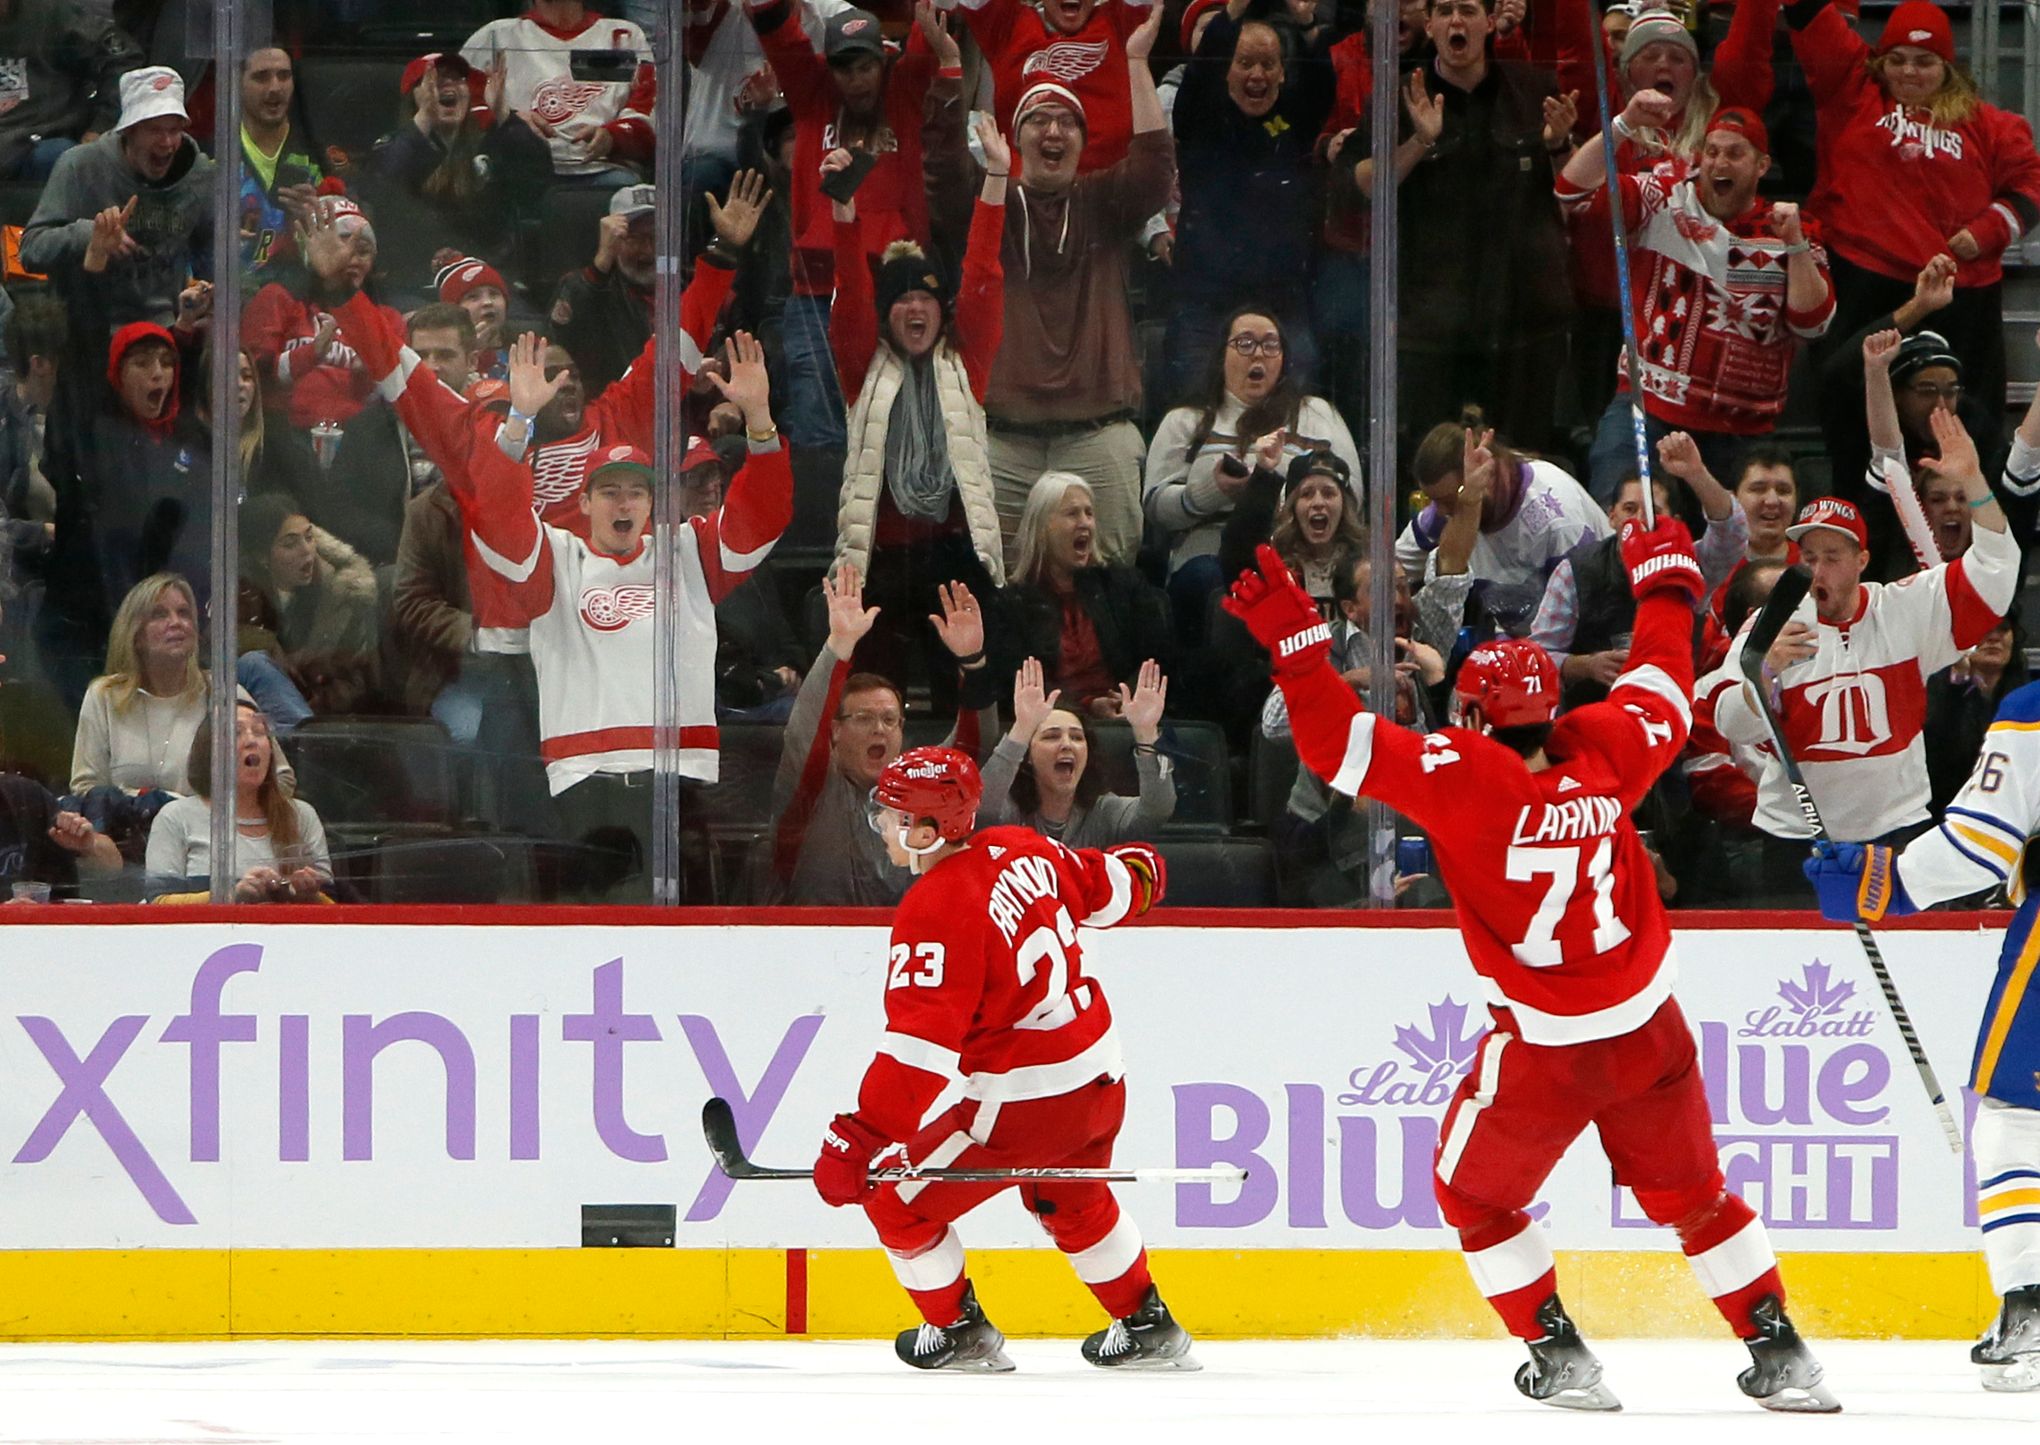 Dylan Larkin is entering his ninth season with the Red Wings, and